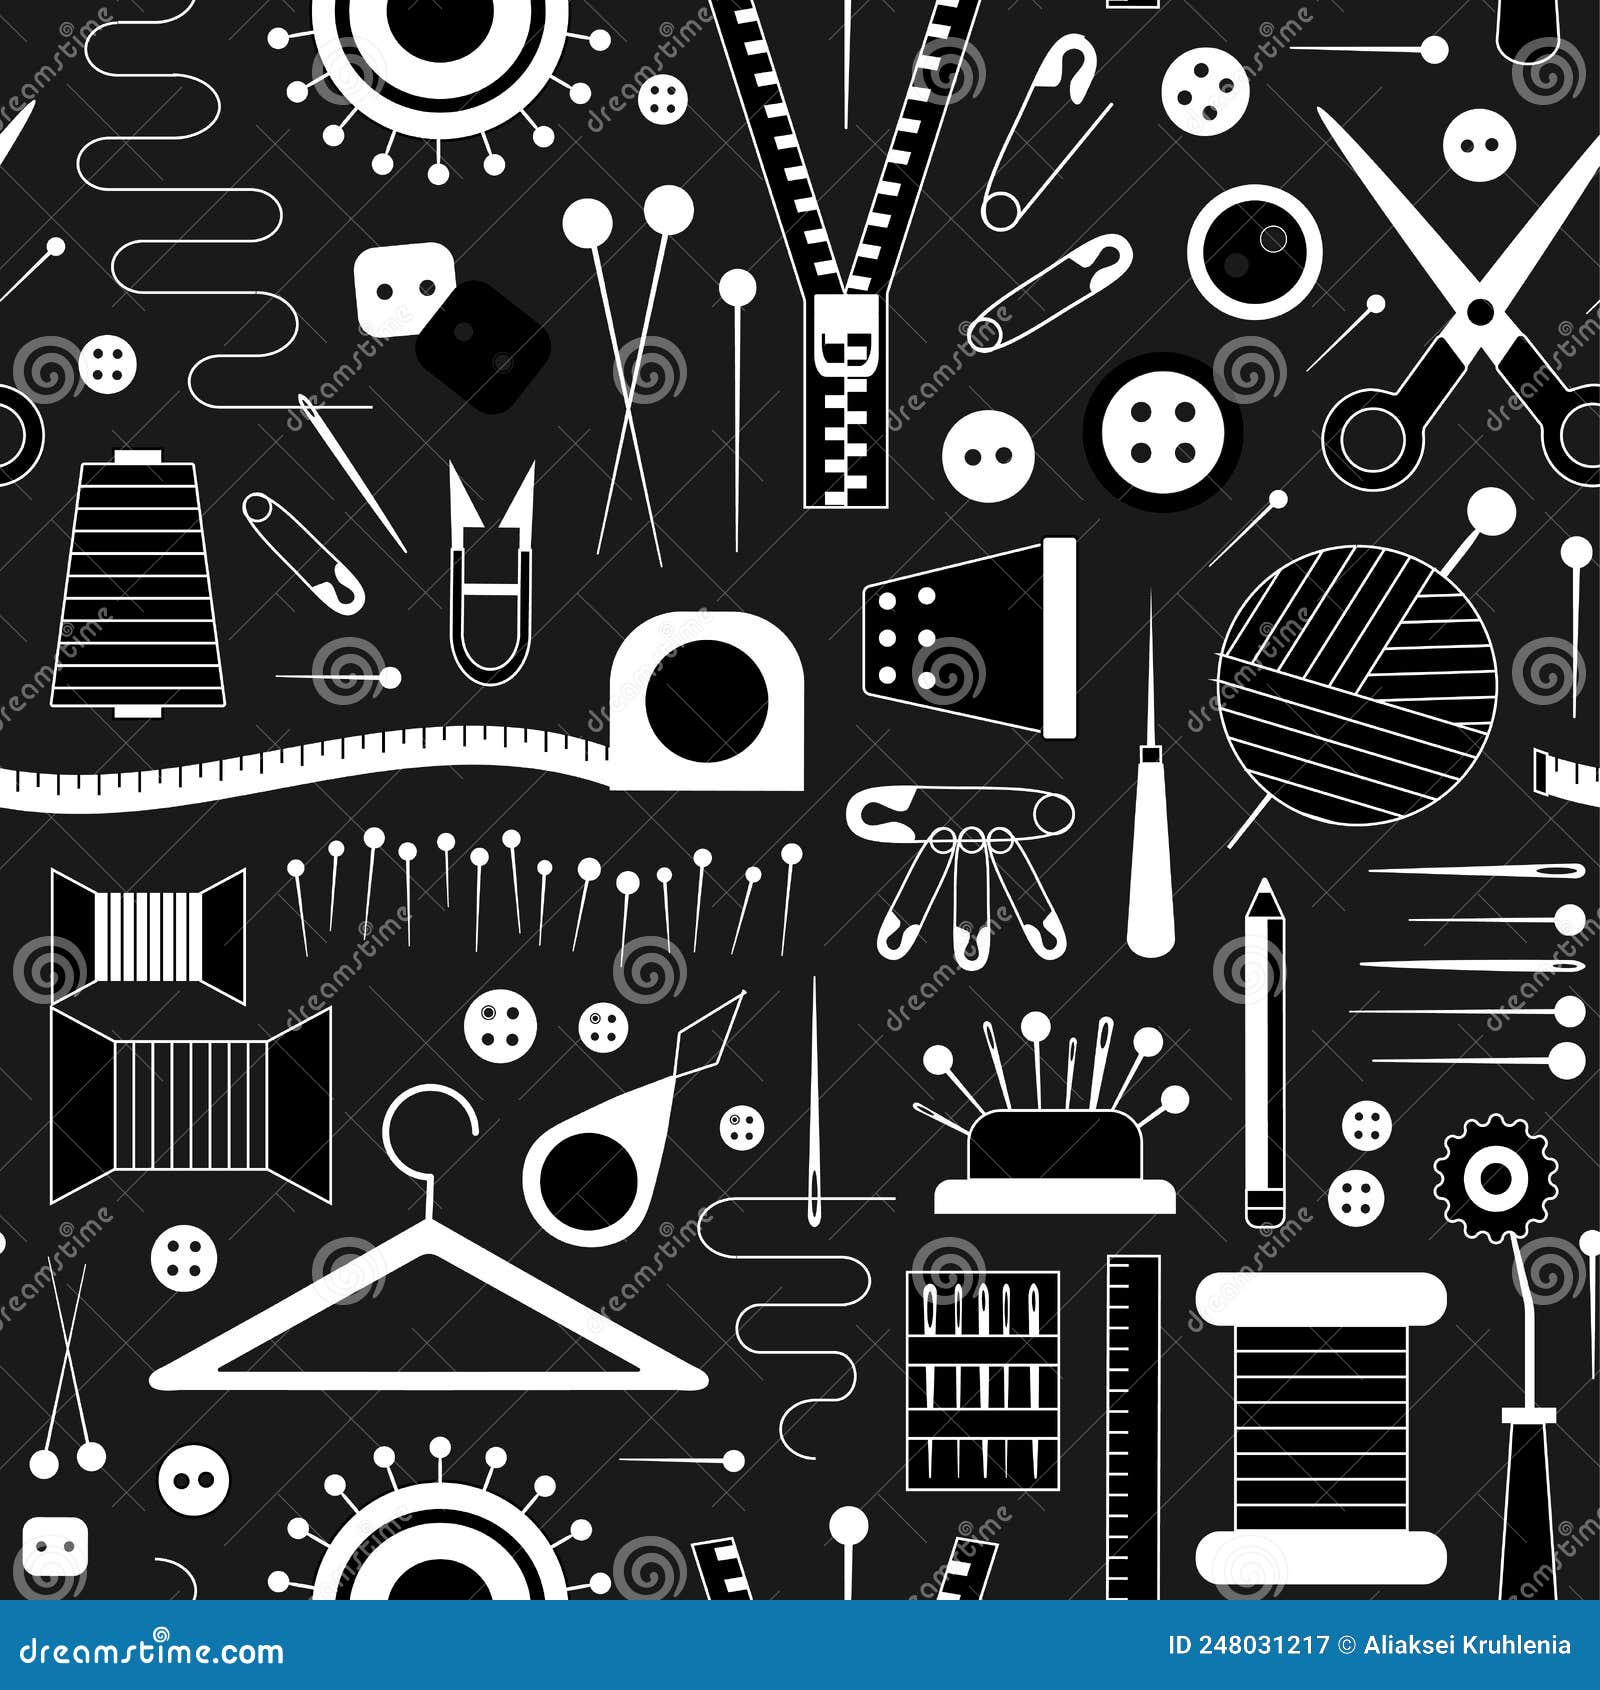 Sewing Hobby Tools and Supplies Outline Pattern Stock Vector